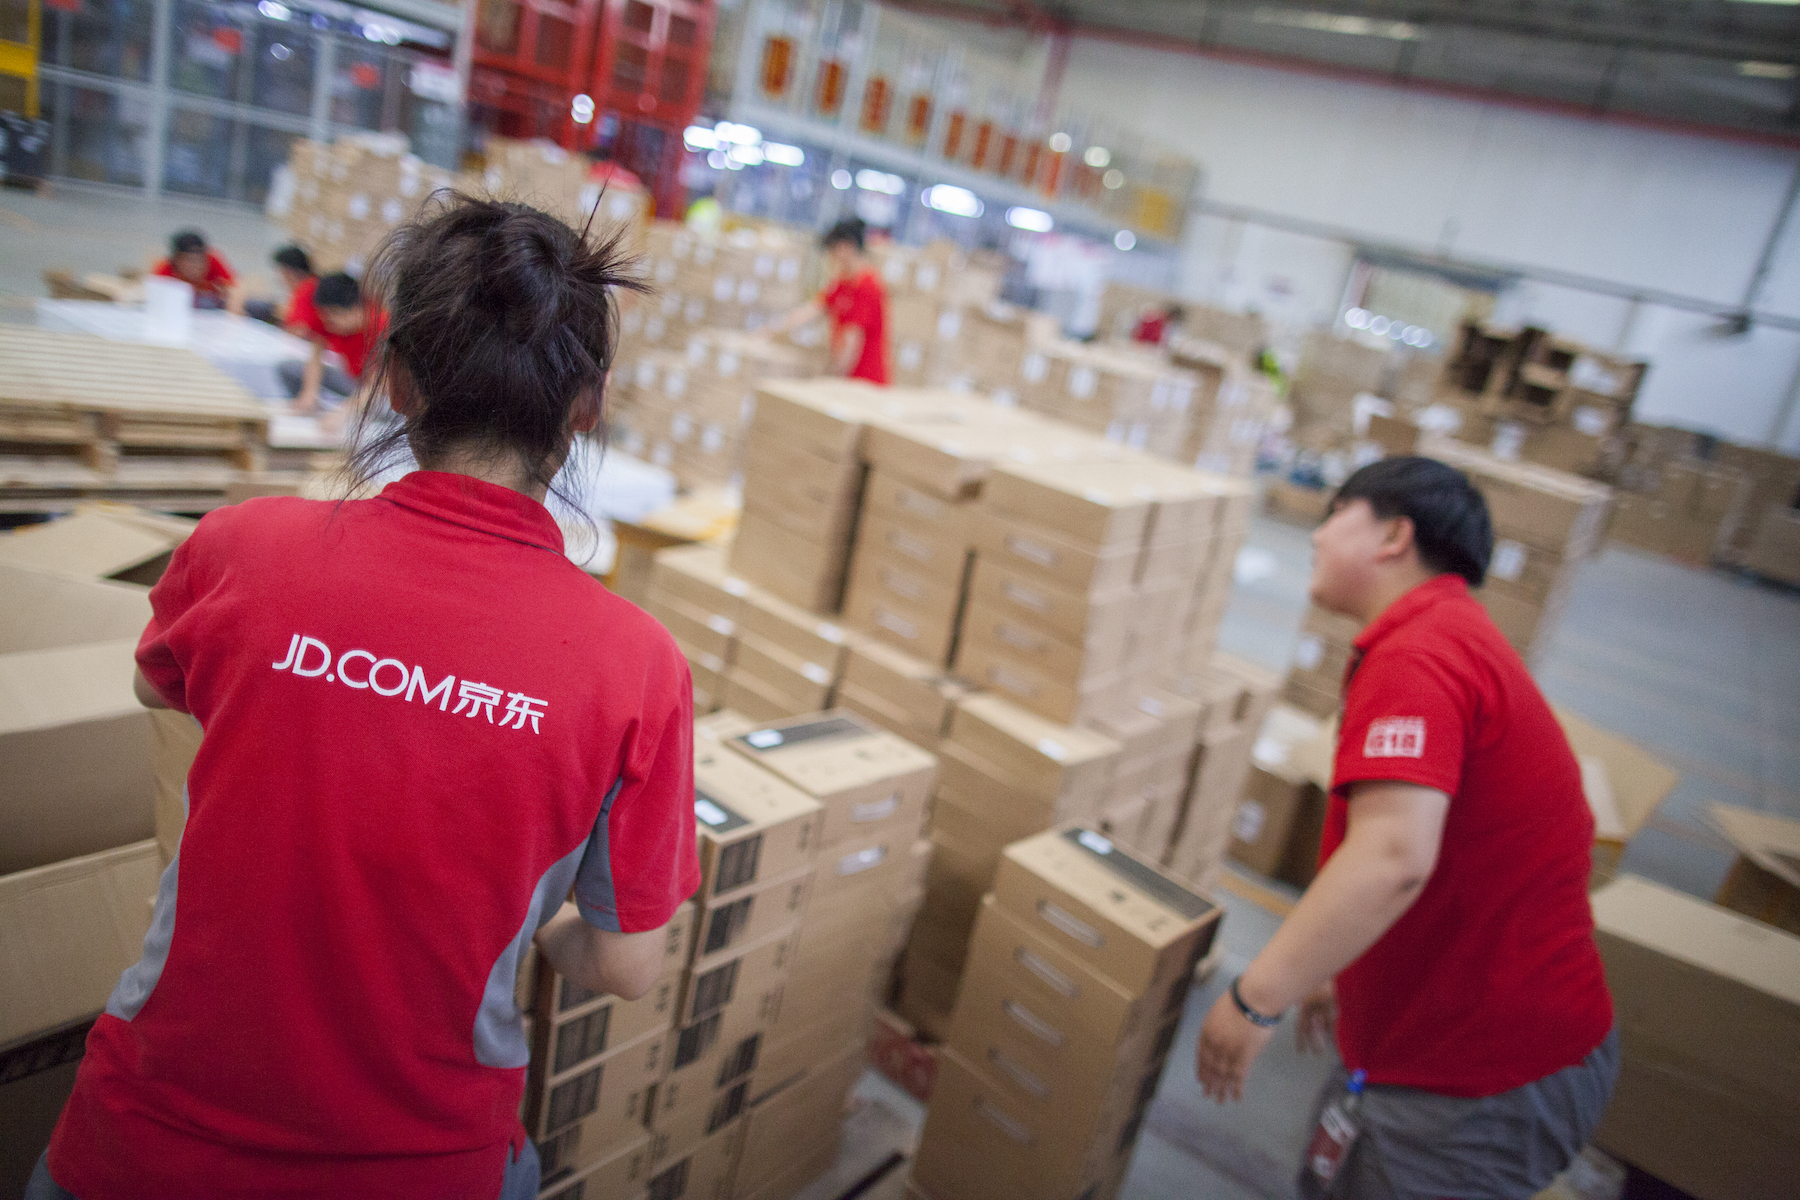 Two warehouse workers of JD.com sort packages, wearing red uniform shirts